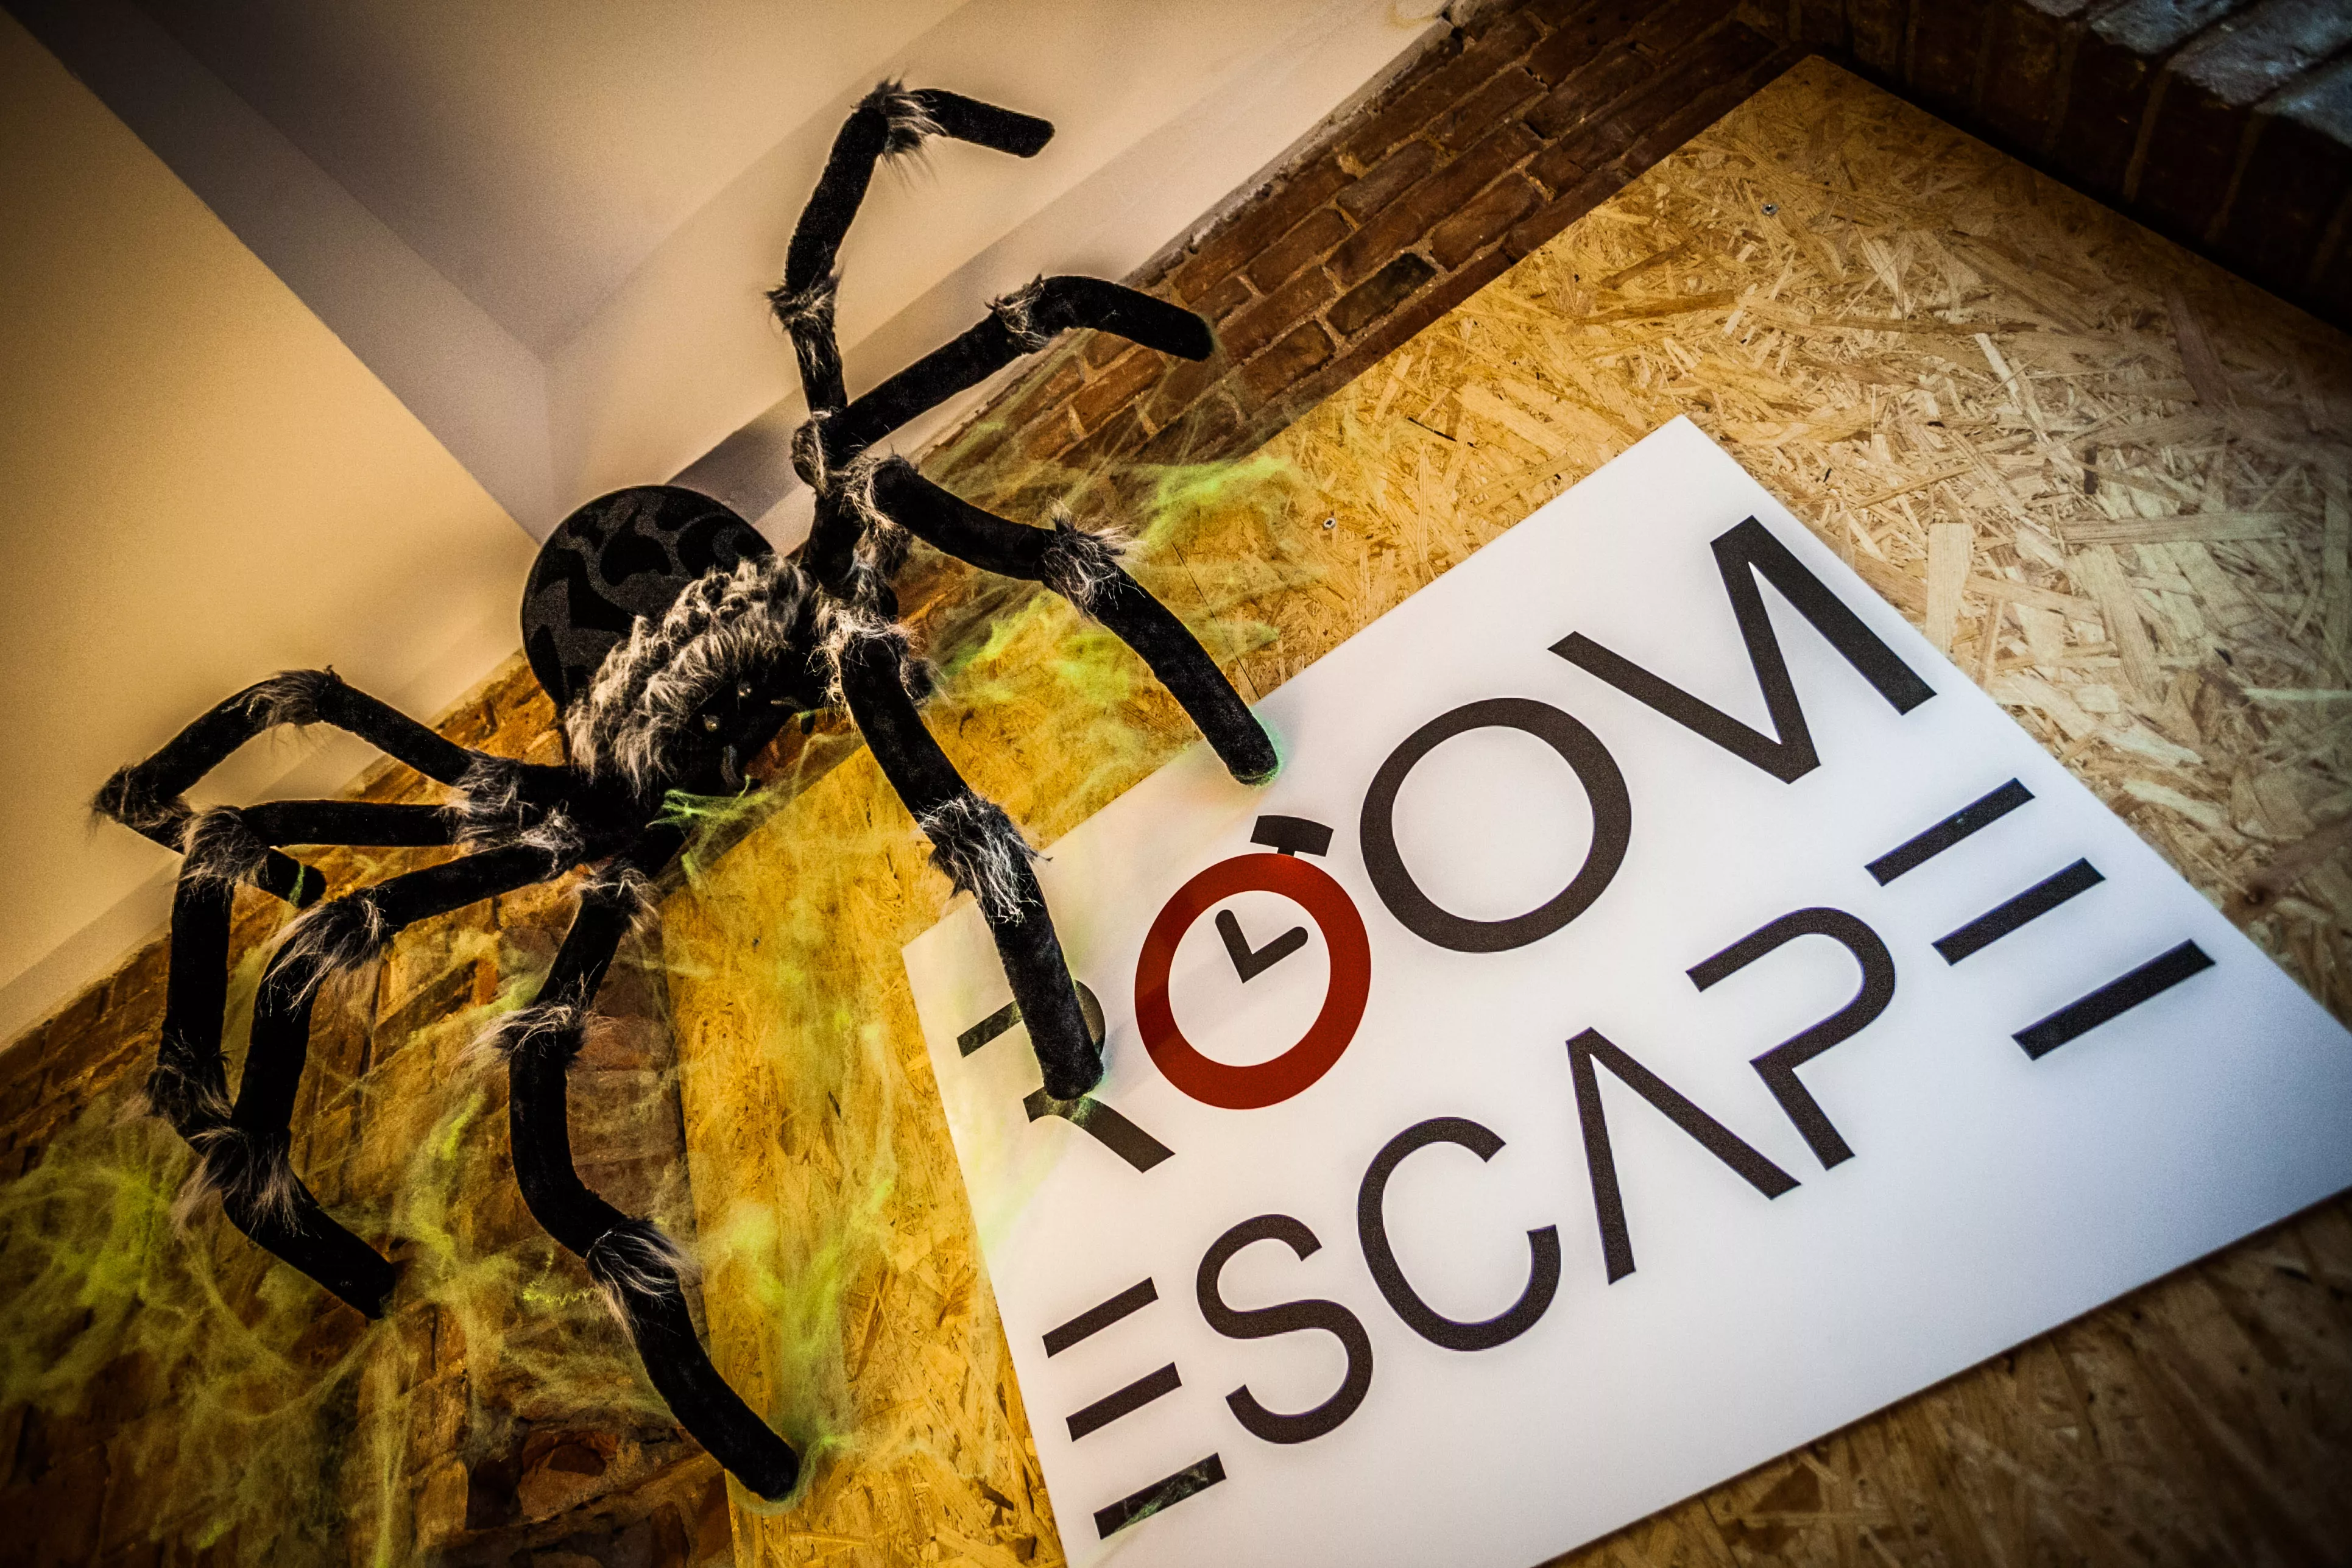 Room Escape Warszawa in Poland, Europe | Escape Rooms - Rated 4.6